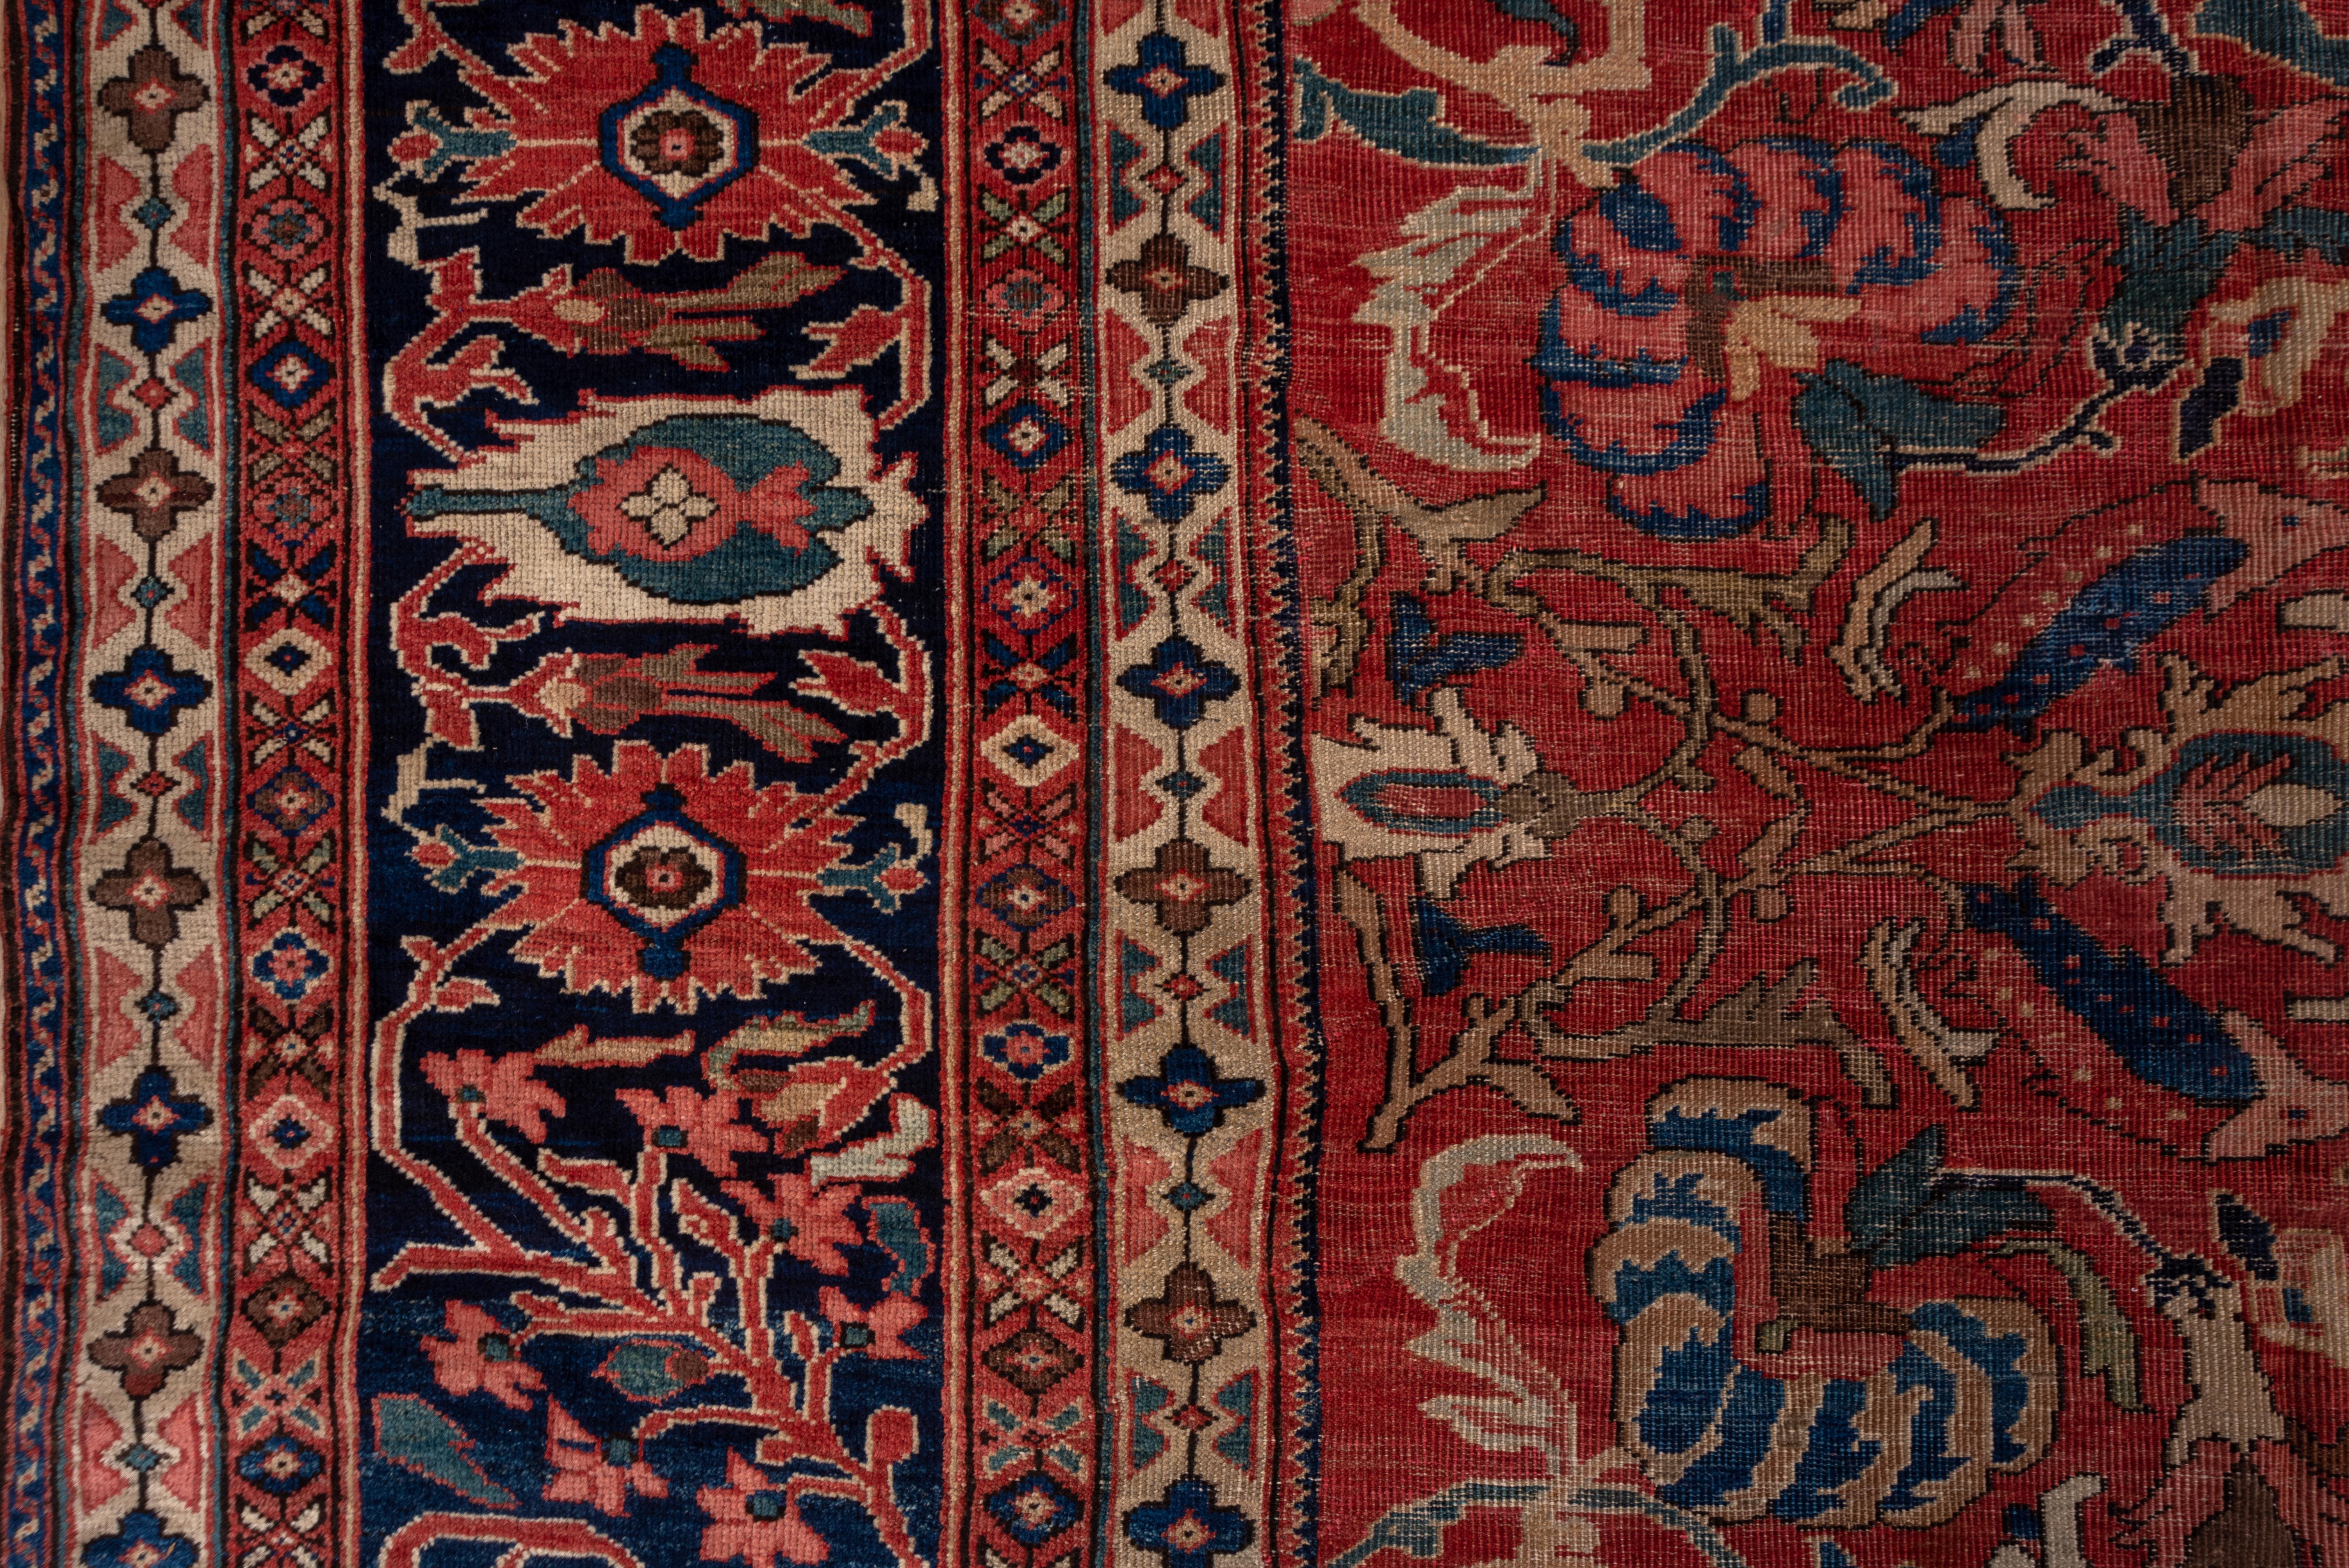 This magnificent west Persian village carpet with a splendid natural dye palette features a tomato madder field centered by a royal blue rosette and displaying teal doubly curved leaves, petal rosettes, striped palmettes and vinery segments. Royal